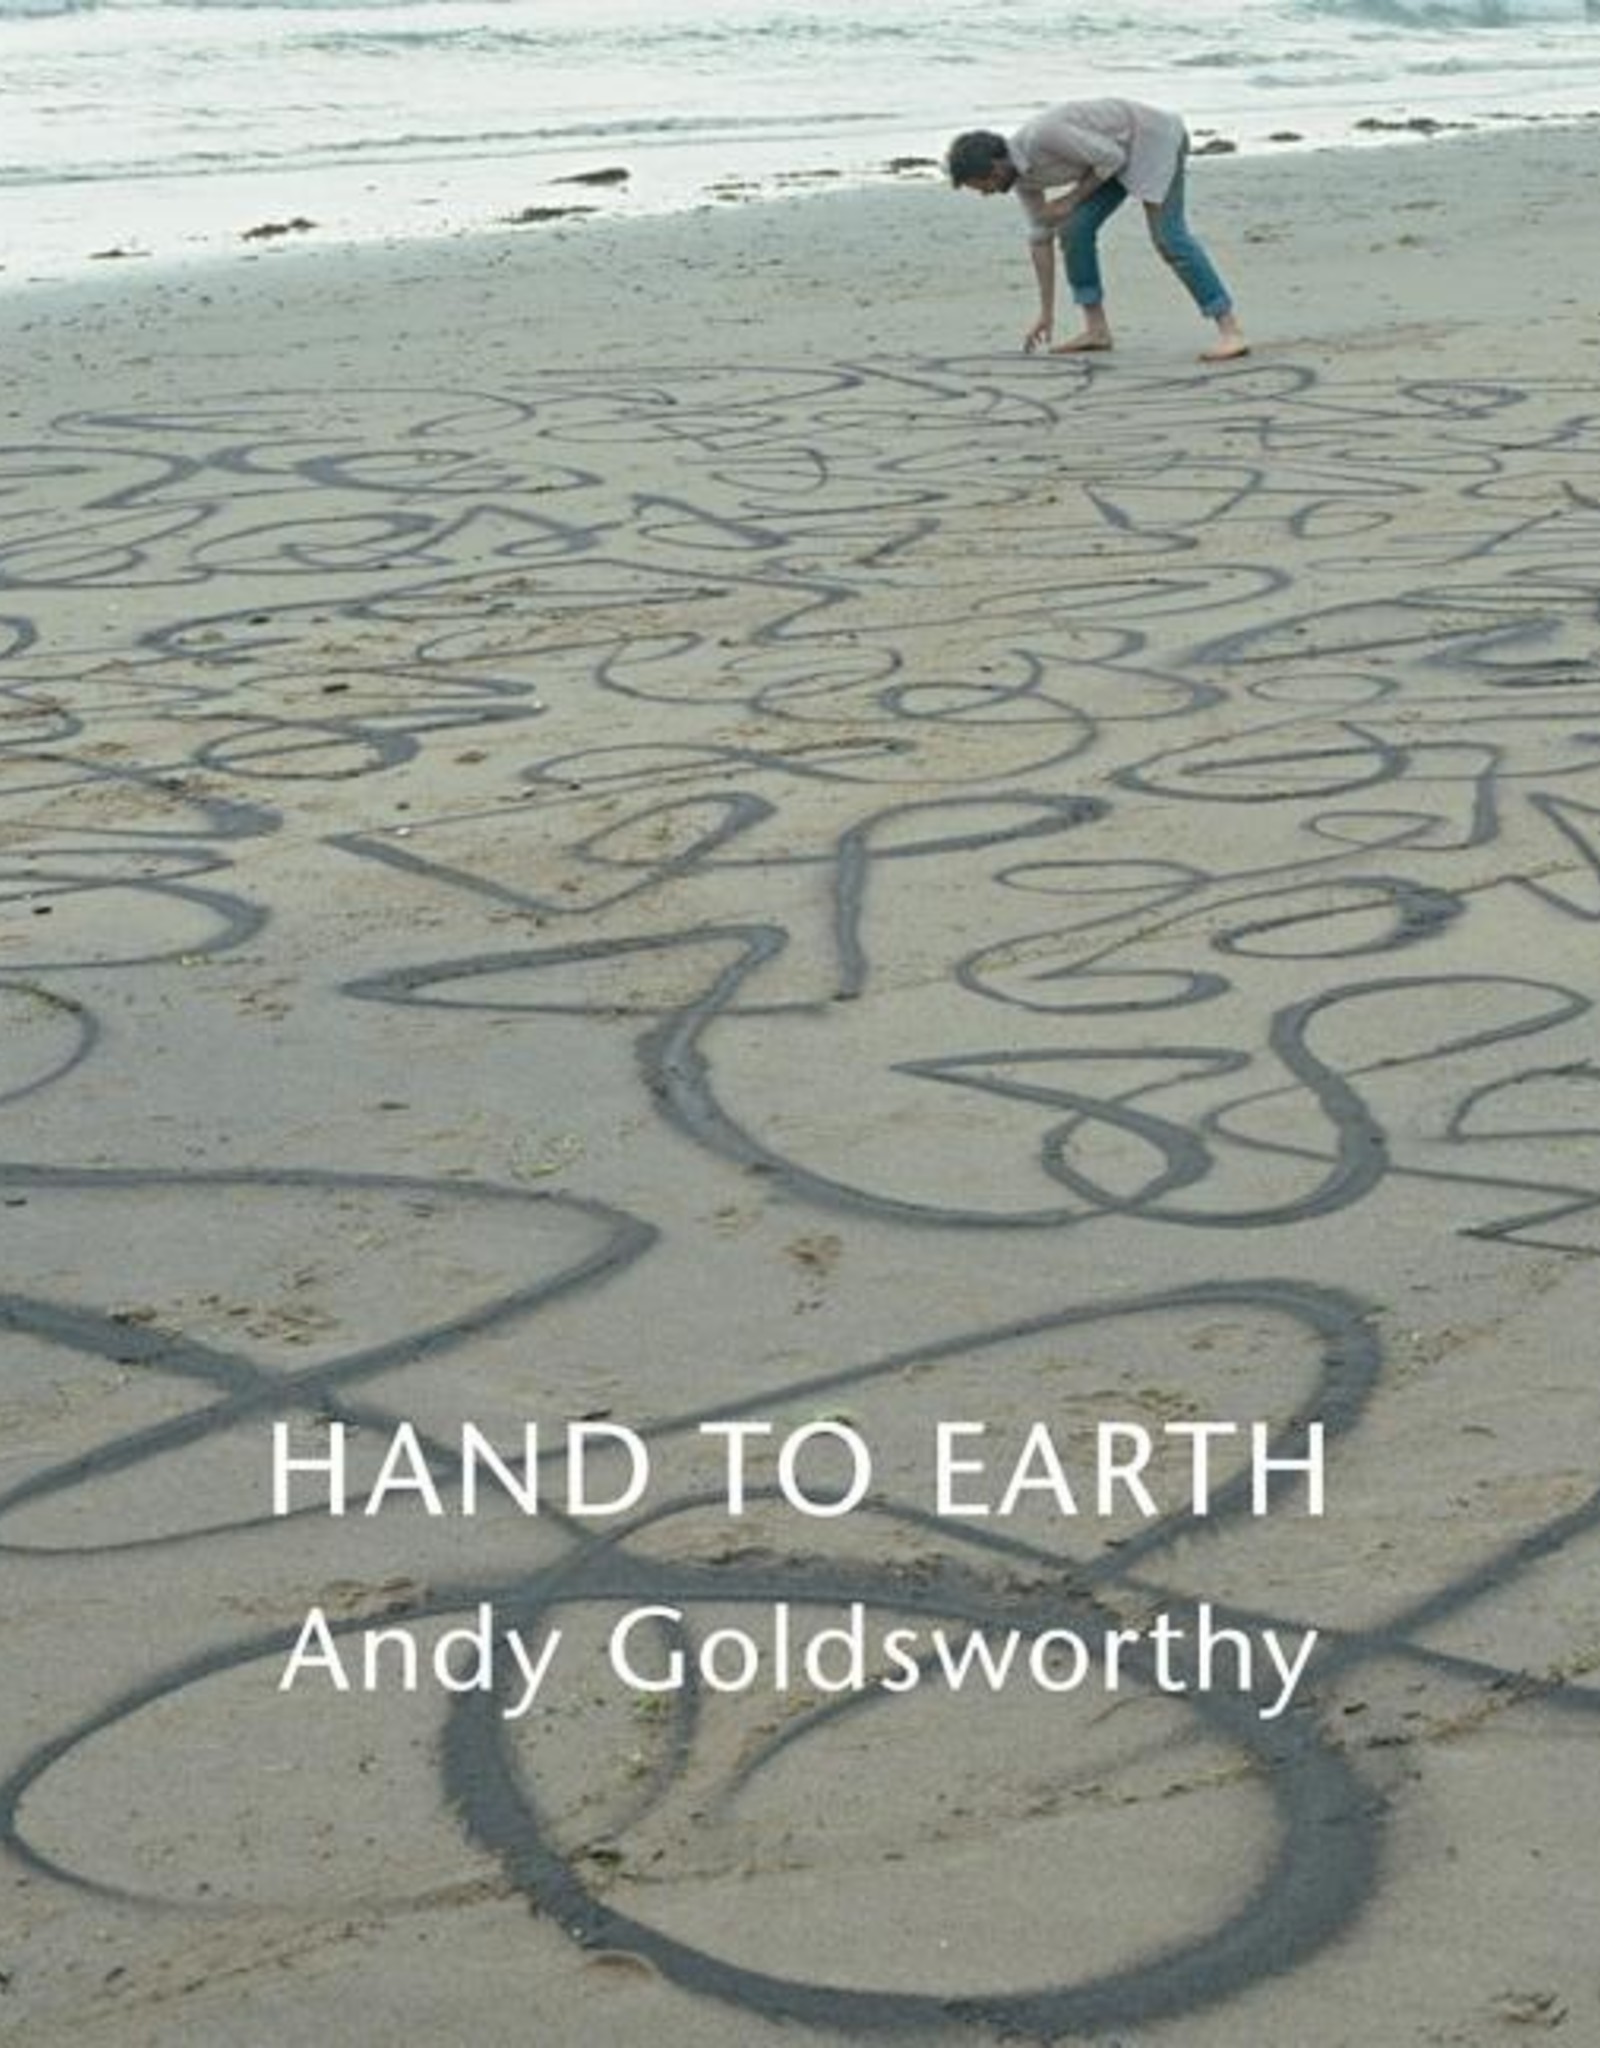 Hand to Earth / Andy Goldsworthy